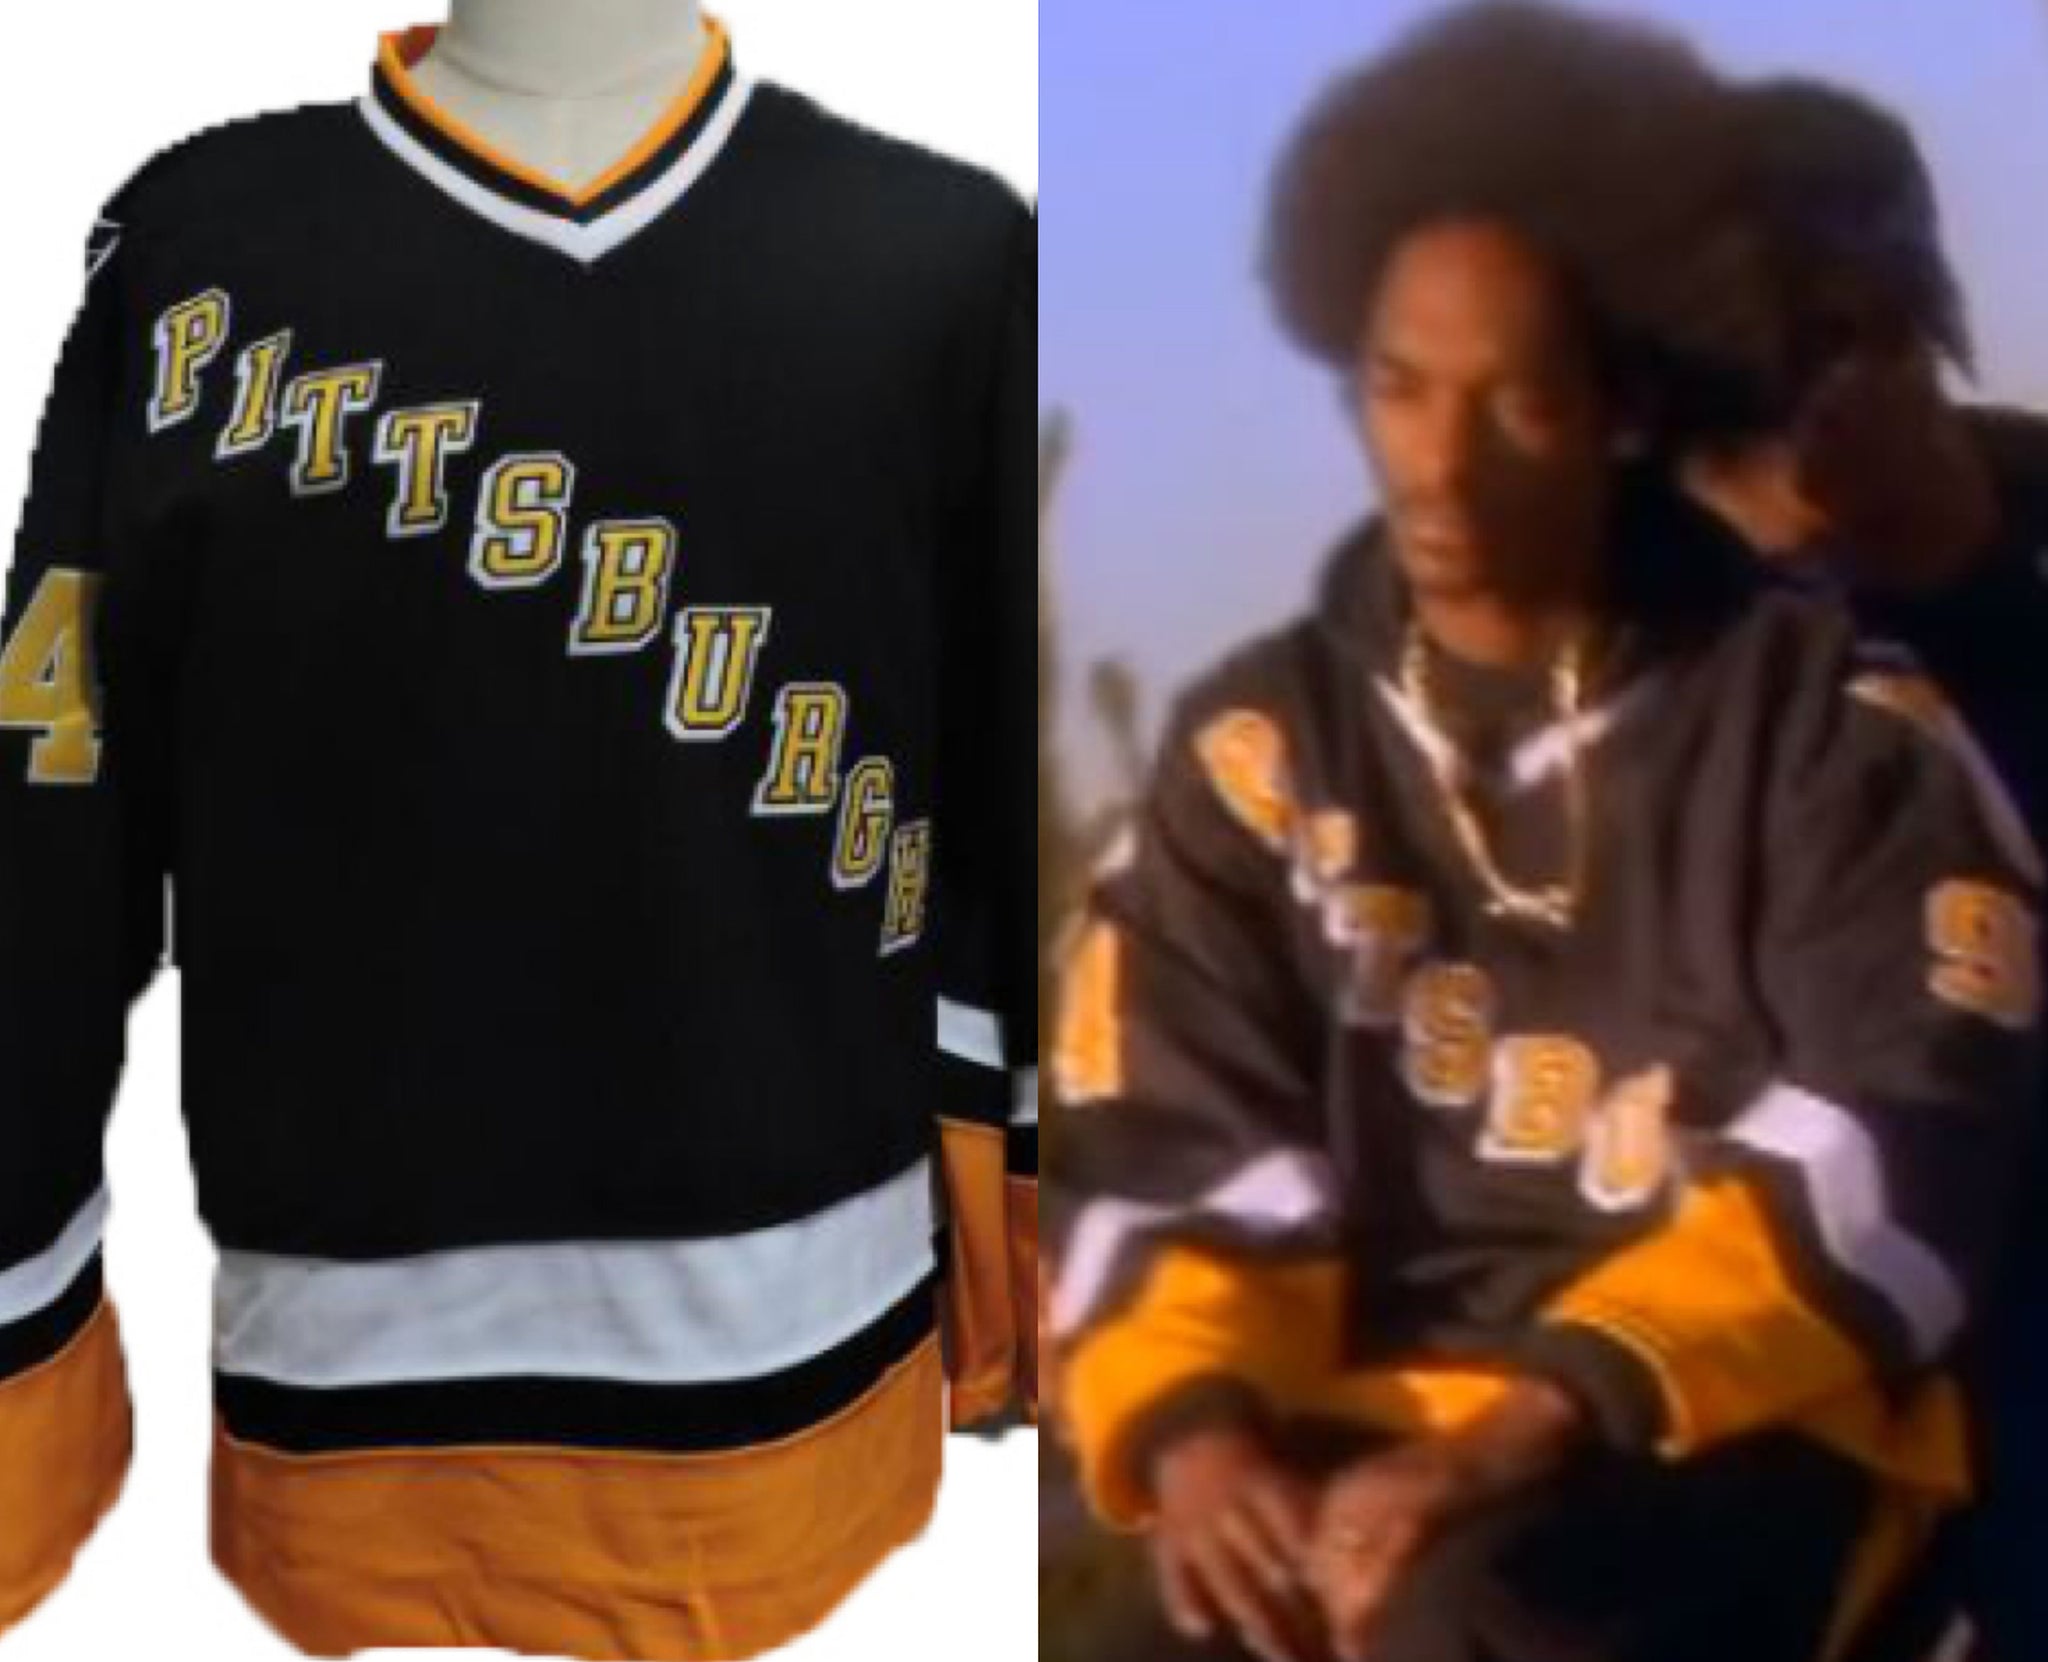 1994 Snoop Dogg Gin and Juice Pittsburgh Penguins Jersey